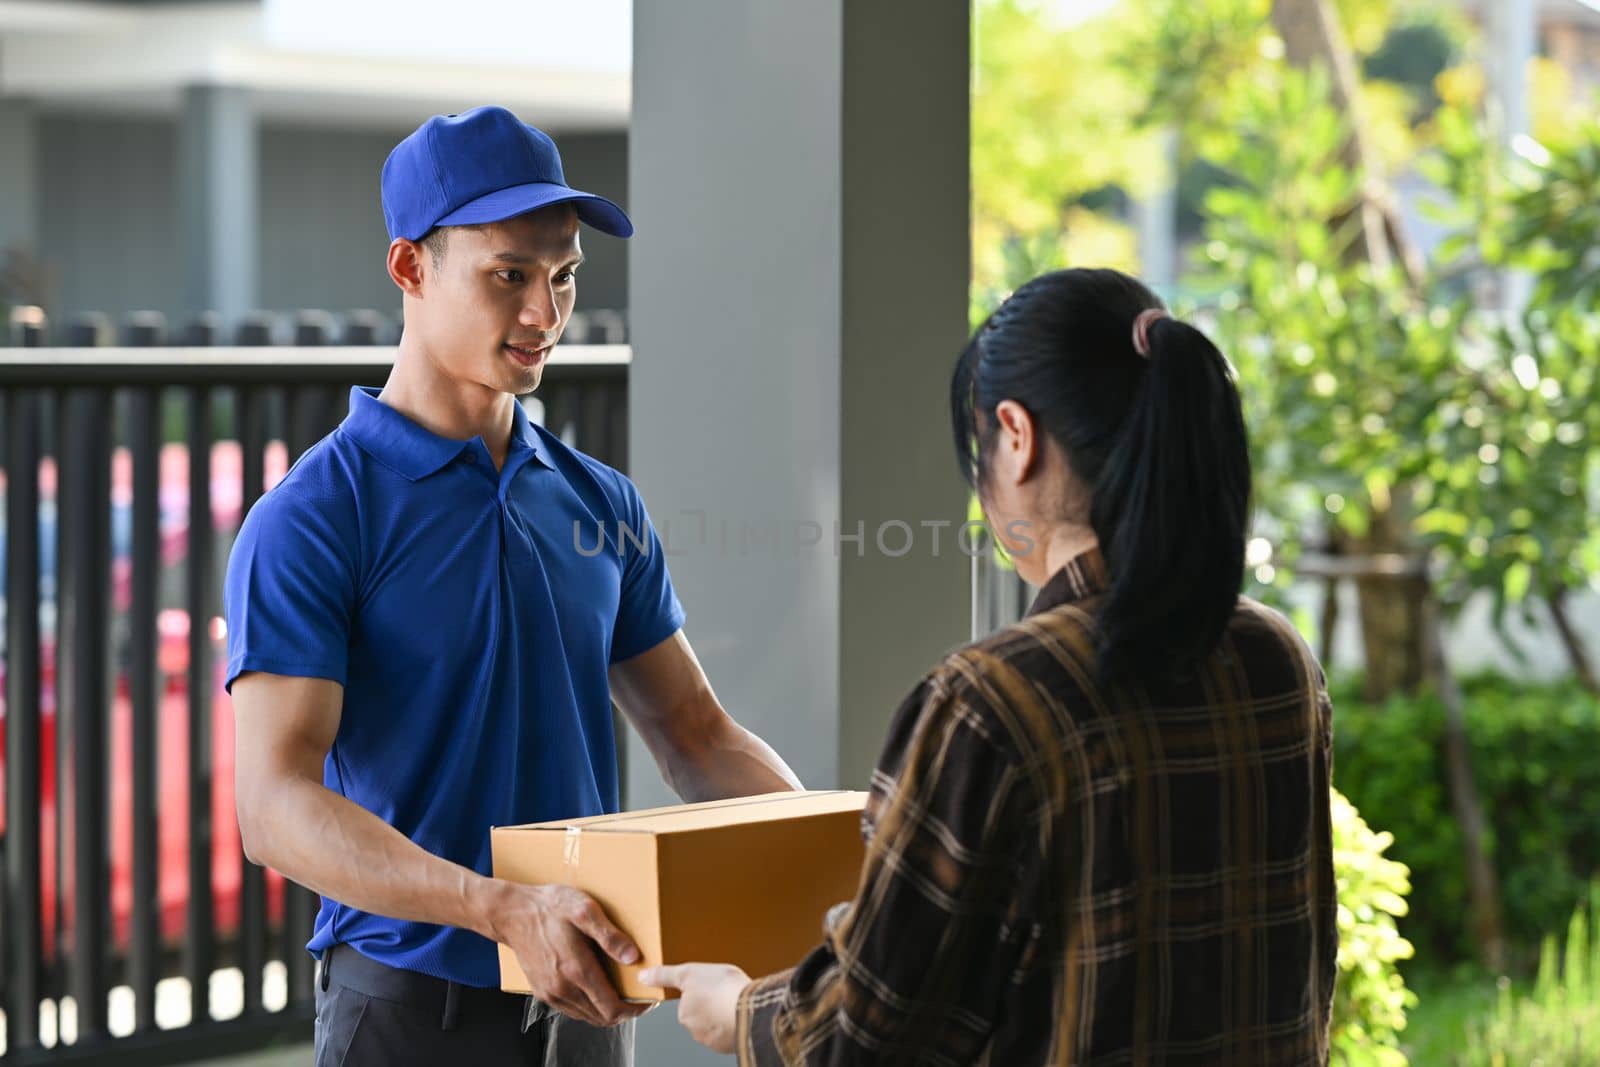 Delivery man giving postal package to customer at doorway. Delivery service, post and shipping concept.